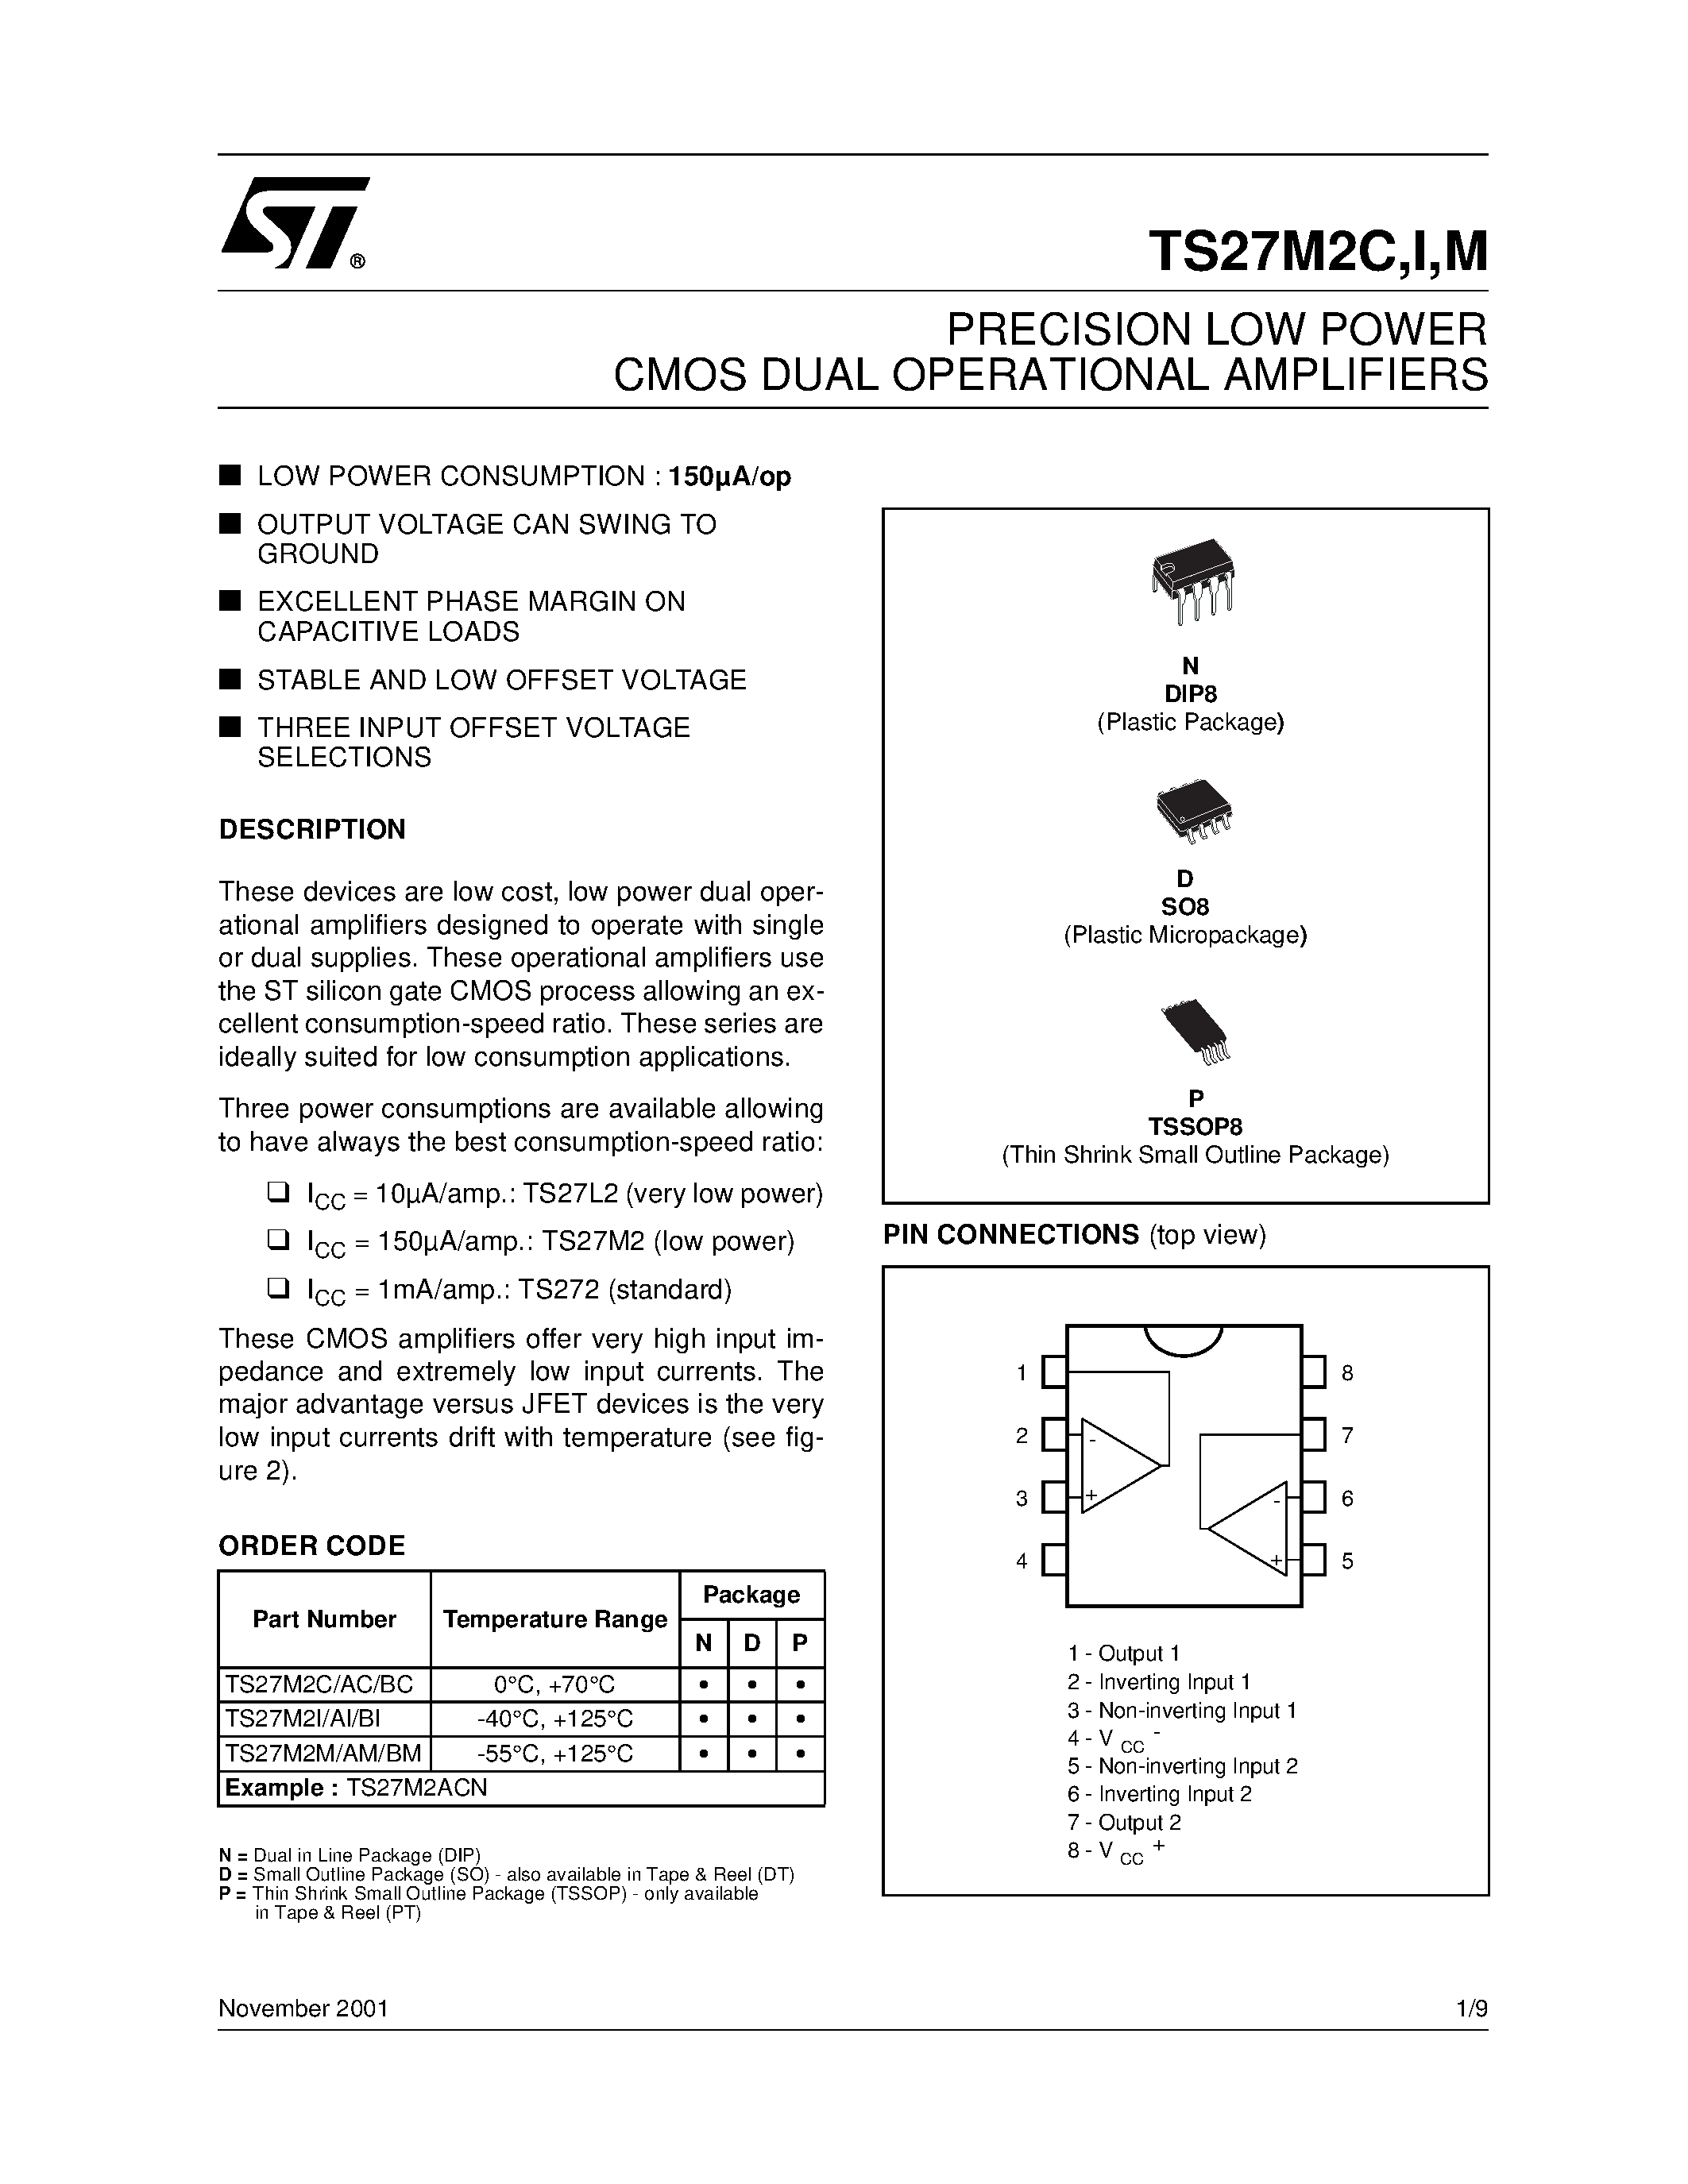 Datasheet TS27M2C - PRECISION LOW POWER CMOS DUAL OPERATIONAL AMPLIFIERS page 1